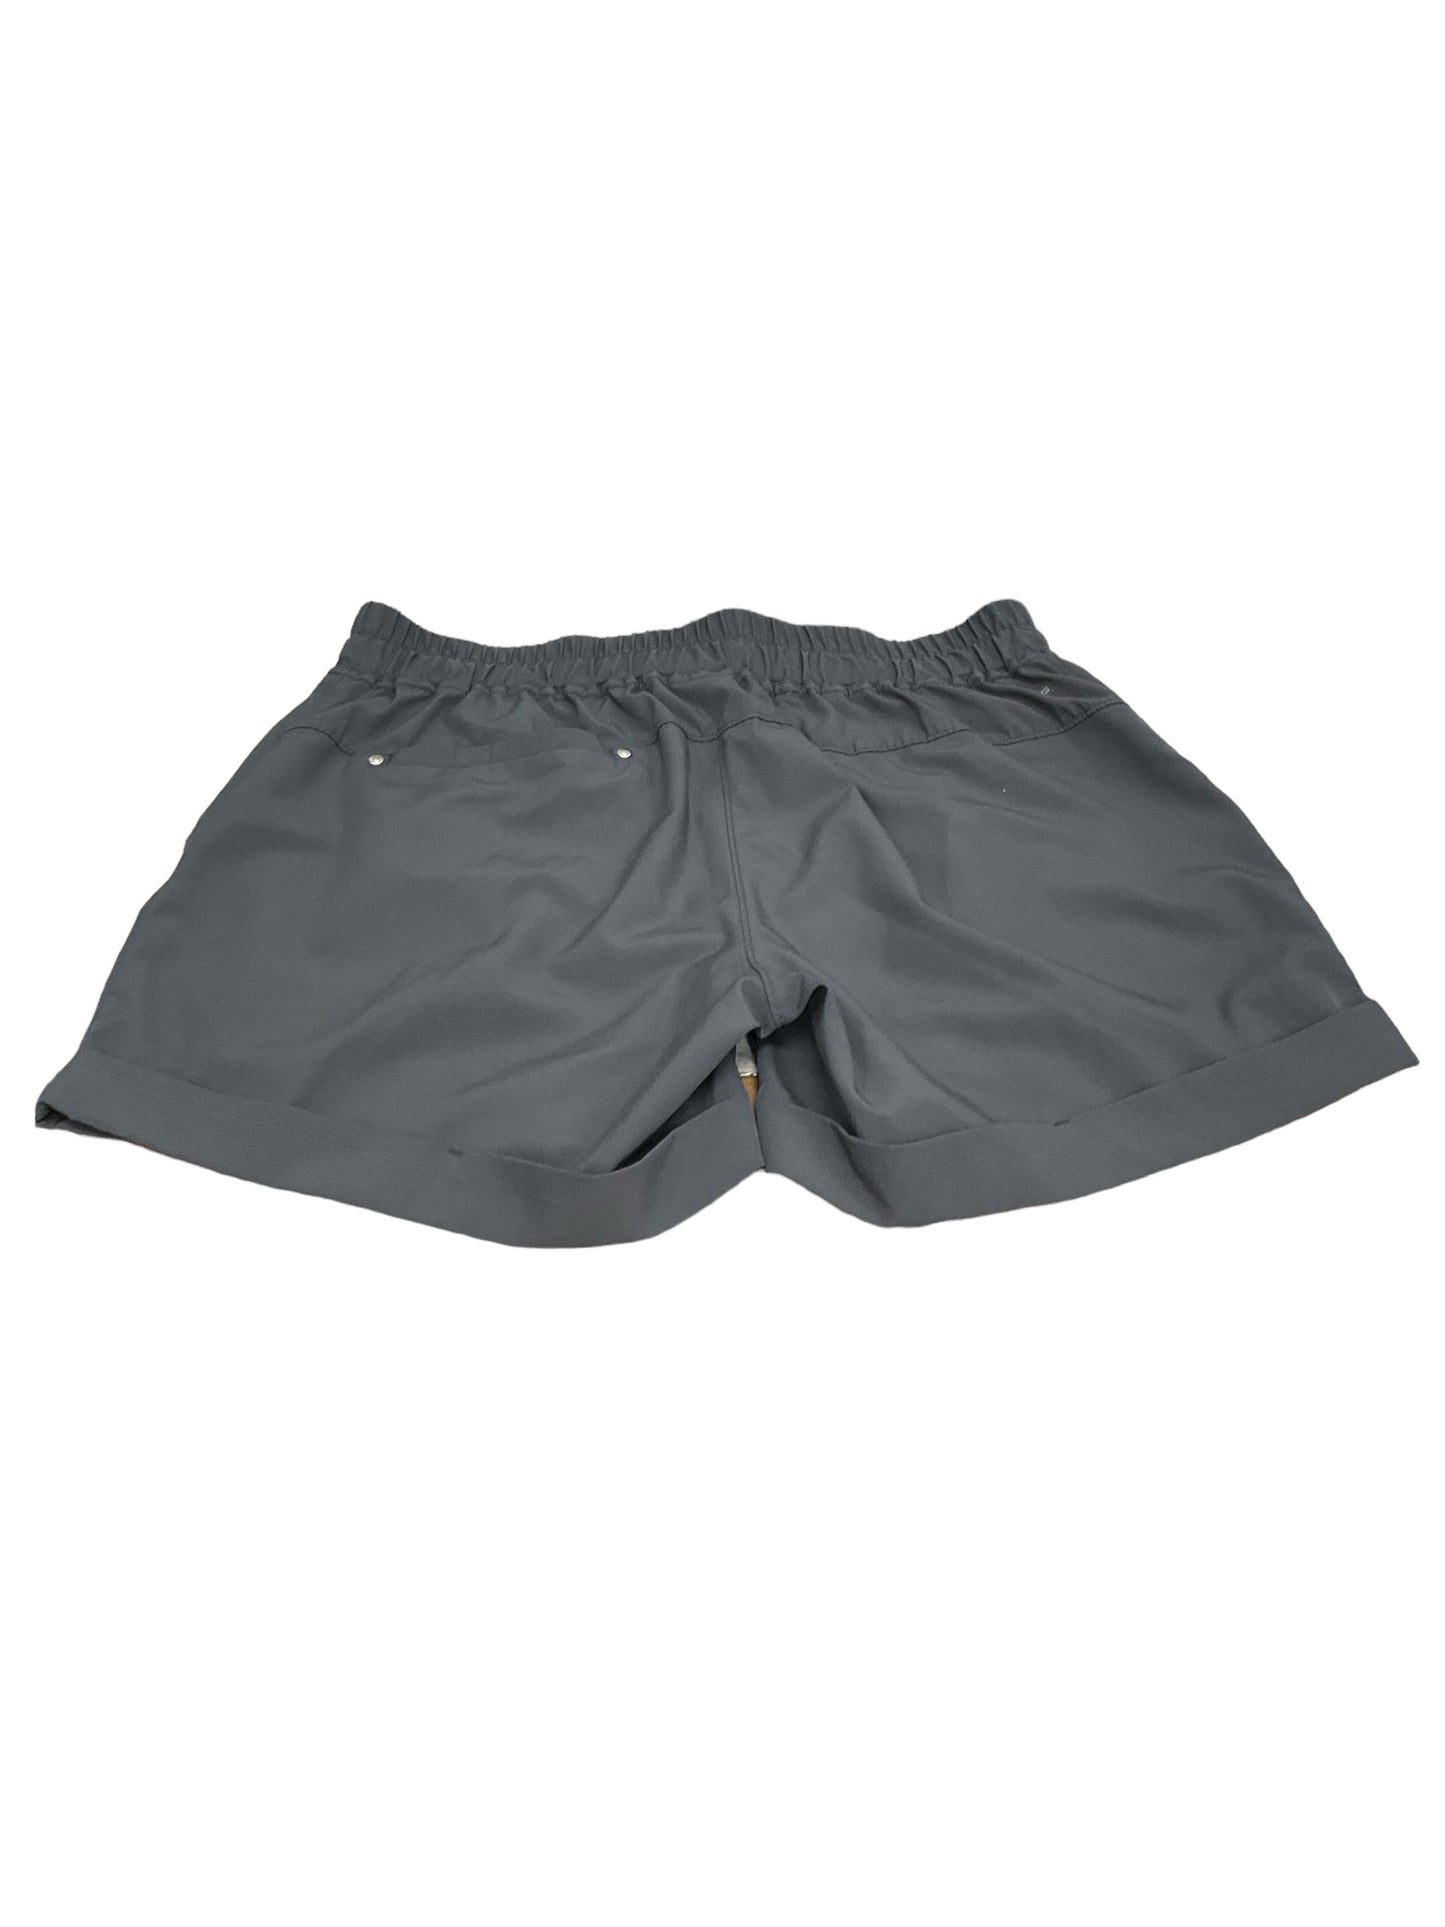 Athletic Shorts By Mpg  Size: M